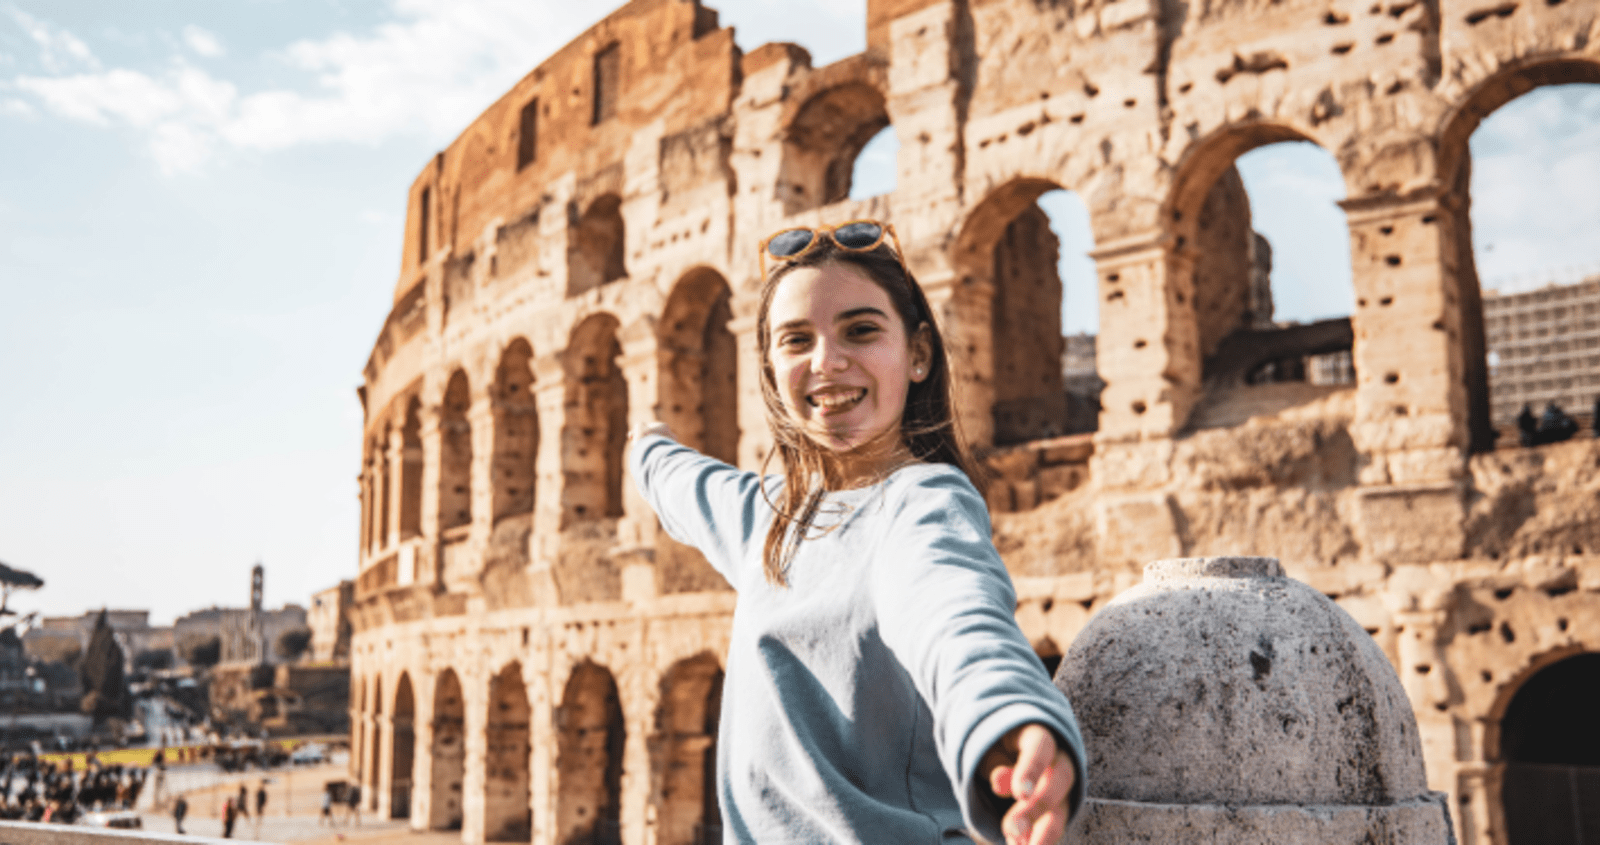 Teenage girl standing in front of the Colosseum in Rome